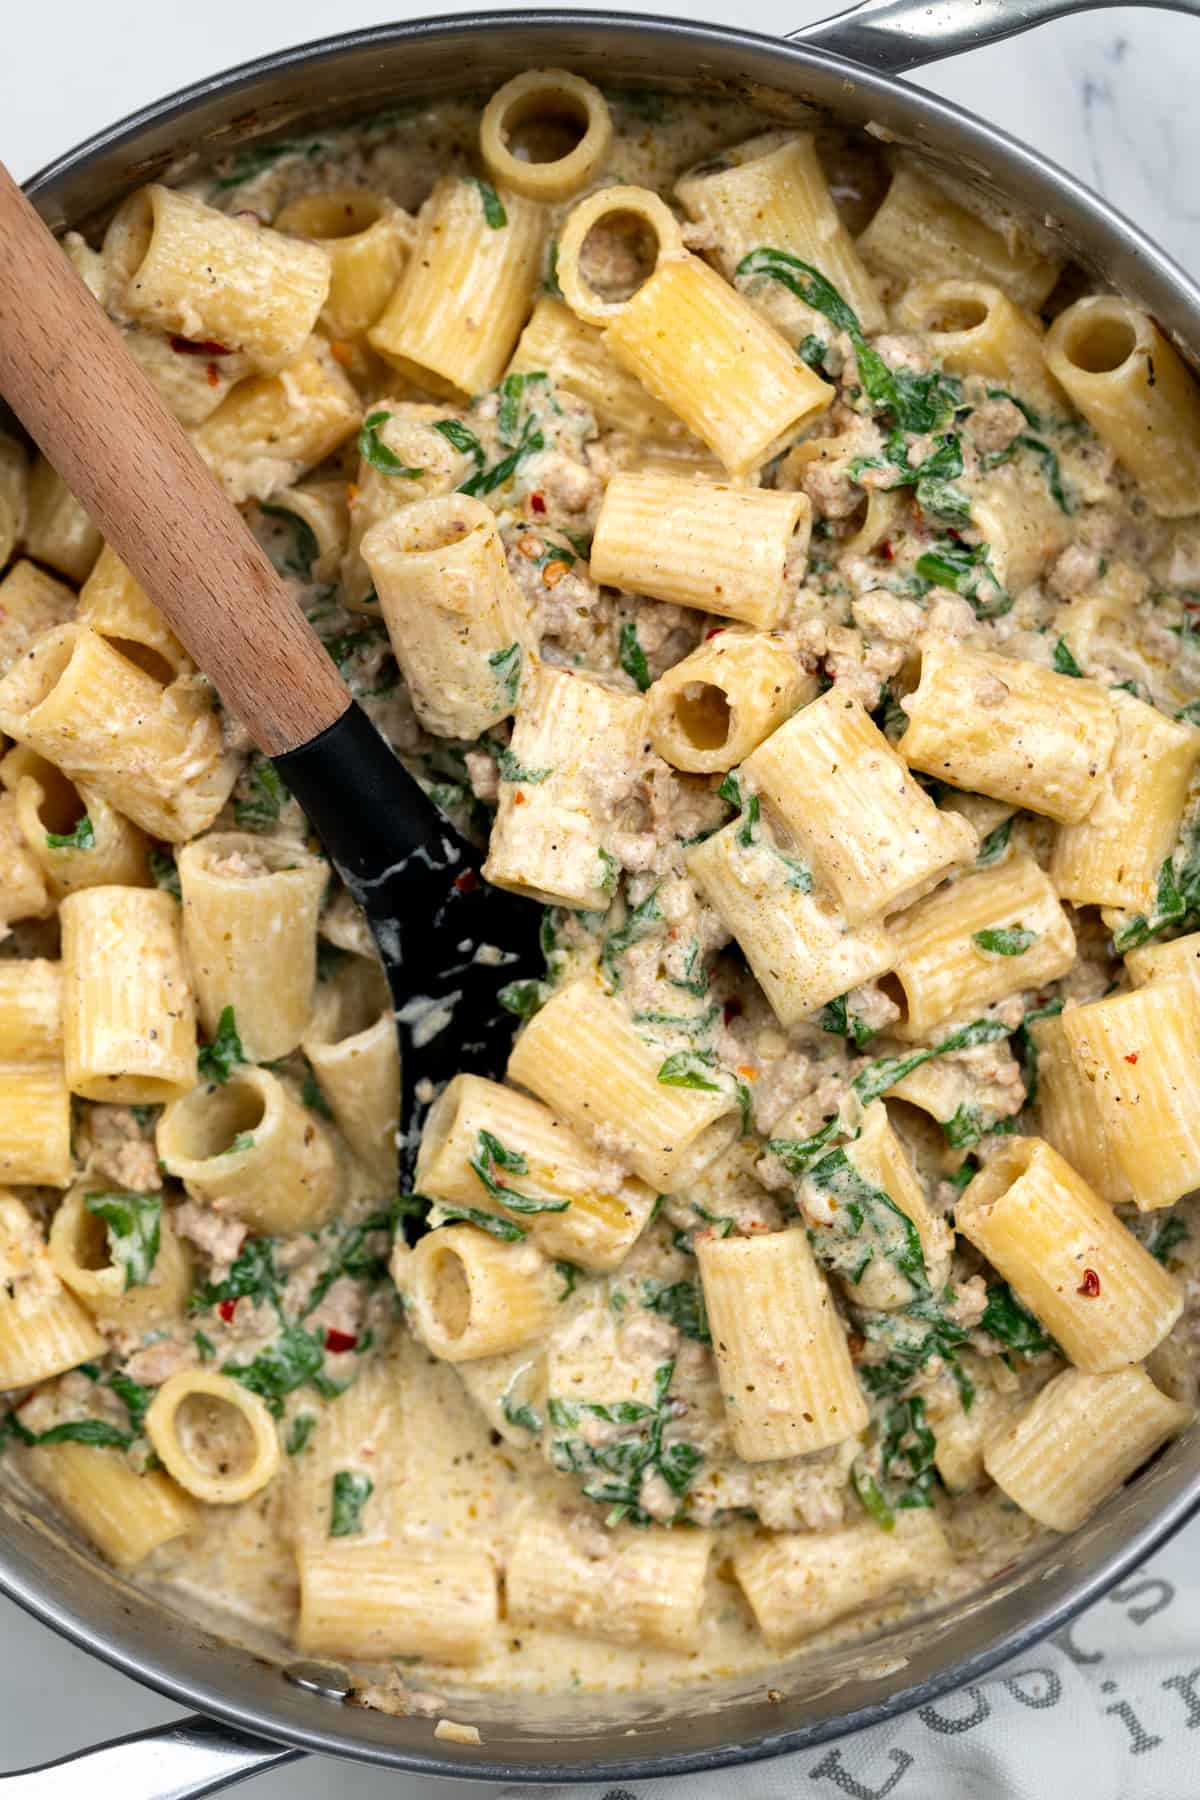 Rigatoni pasta in a creamy spinach and ground sausage sauce